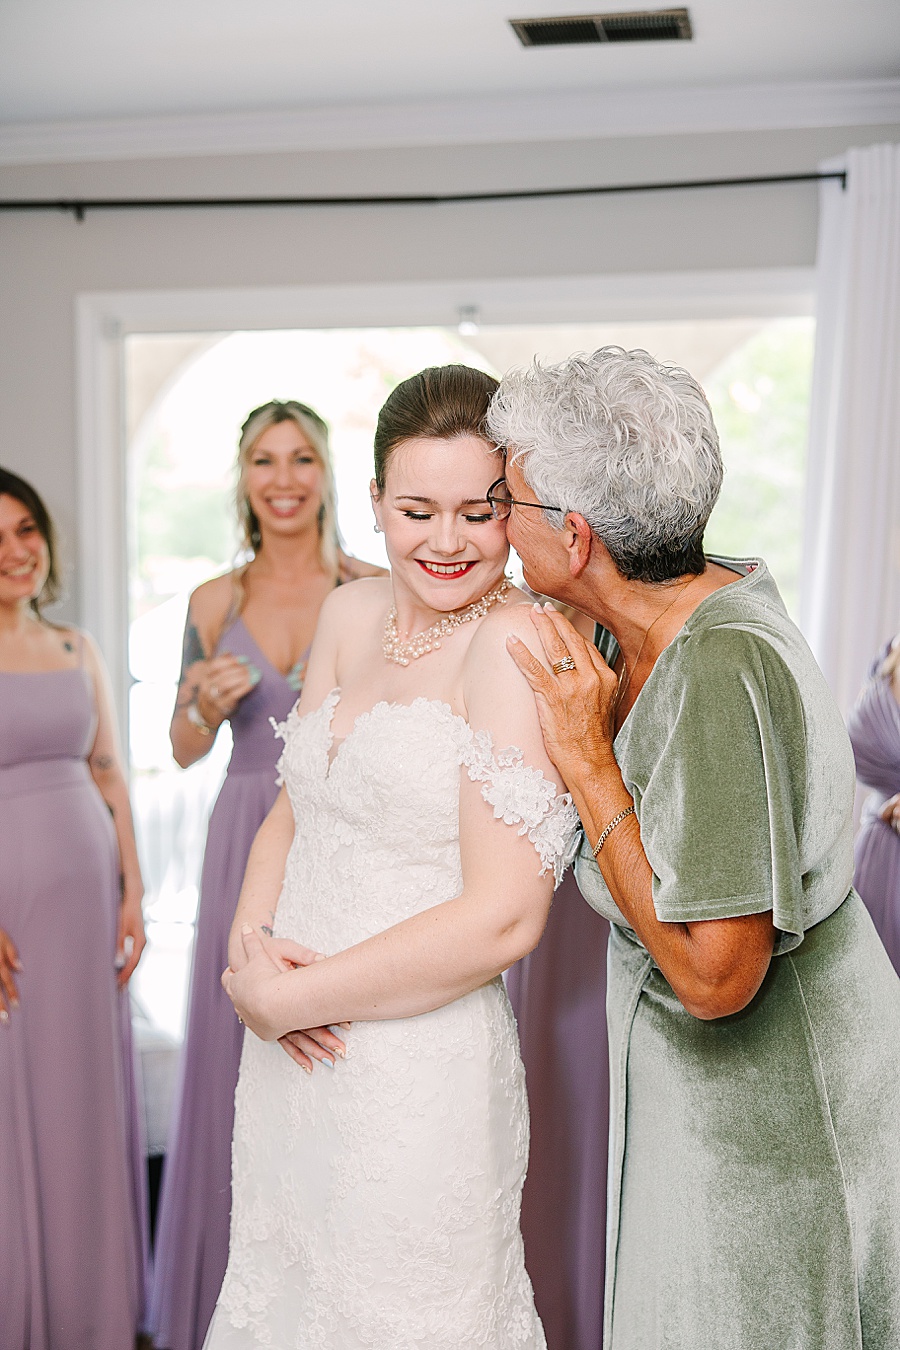 Mother kissing bride on wedding day